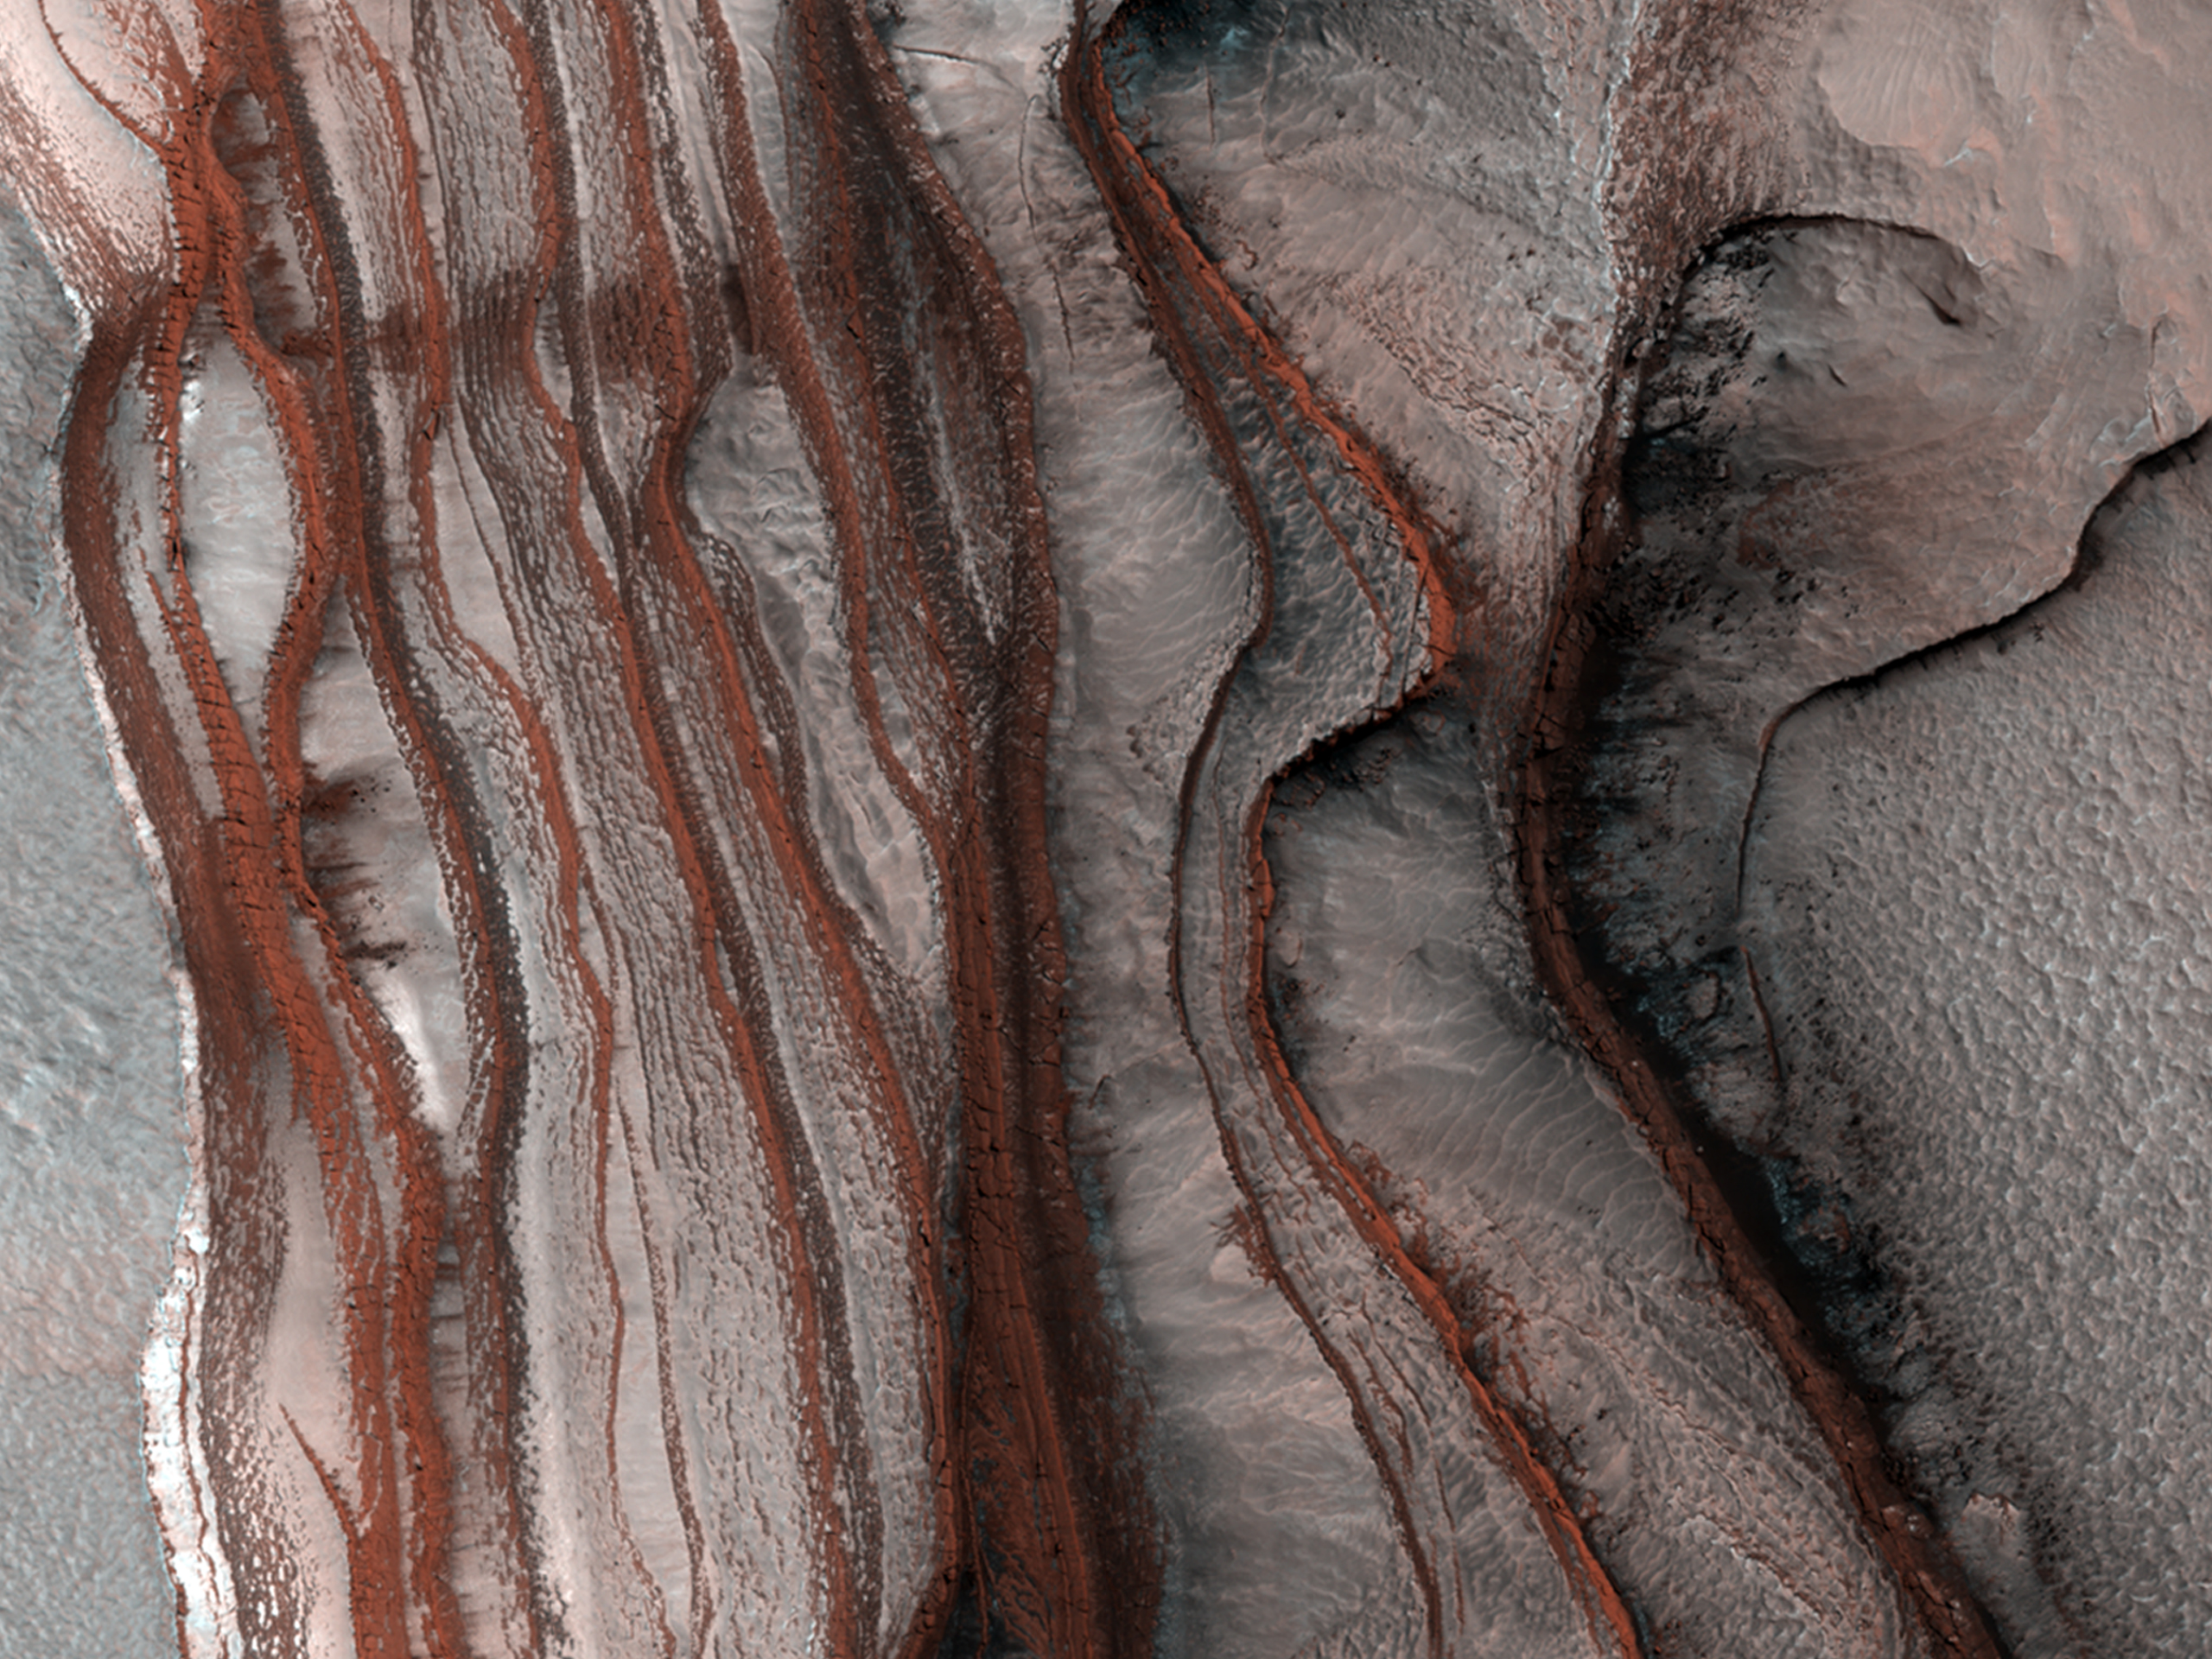 Layers of Cliffs in Northern Mars